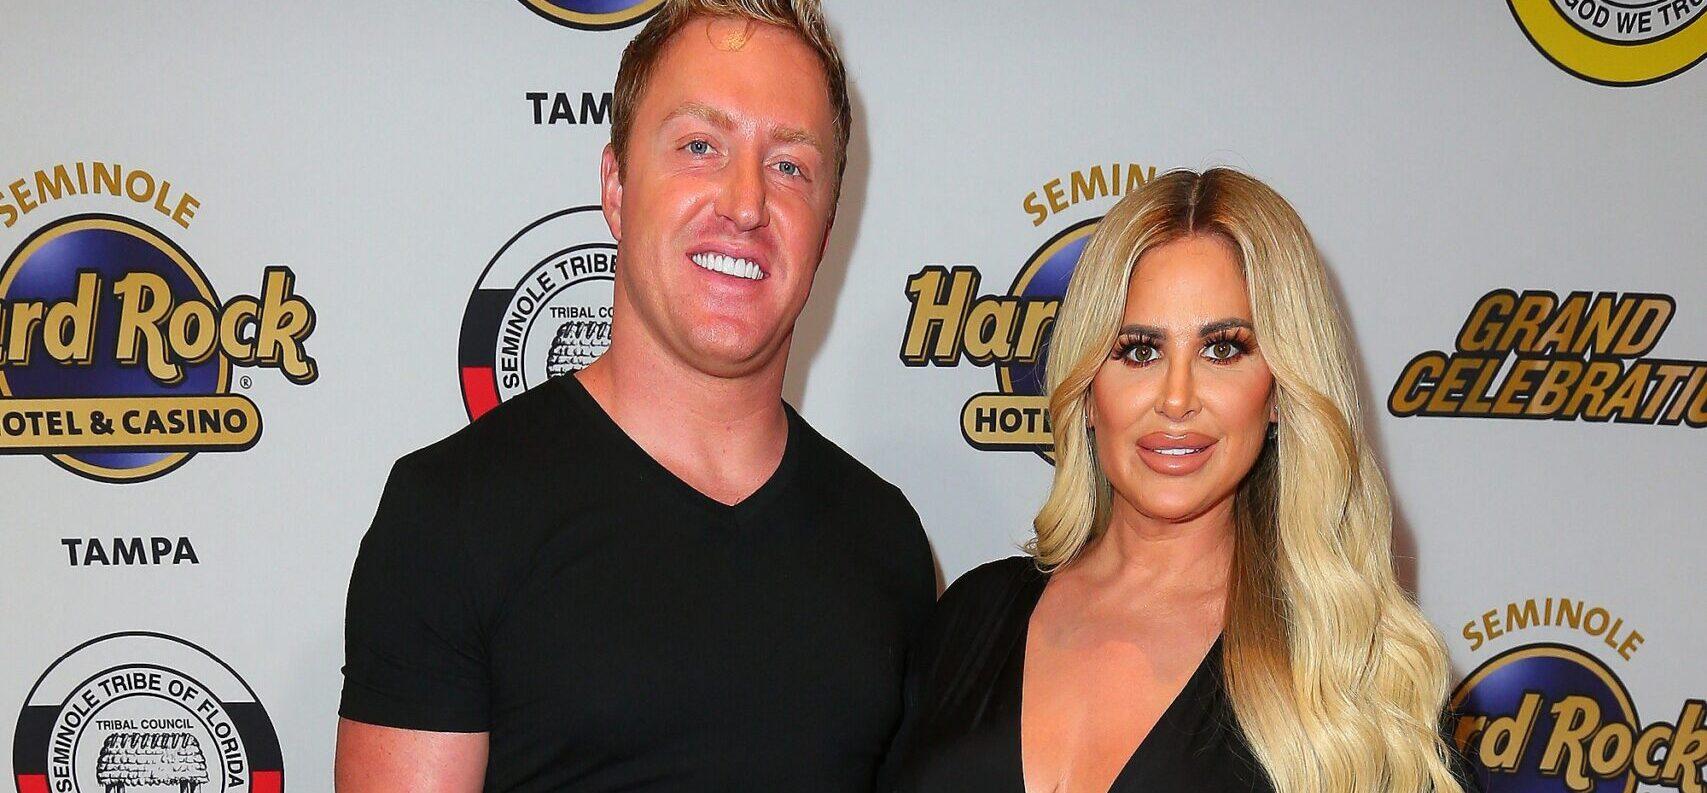 Kim Zolciak And Kroy Biermann Are Seemingly Back Together Weeks After He Filed For Divorce